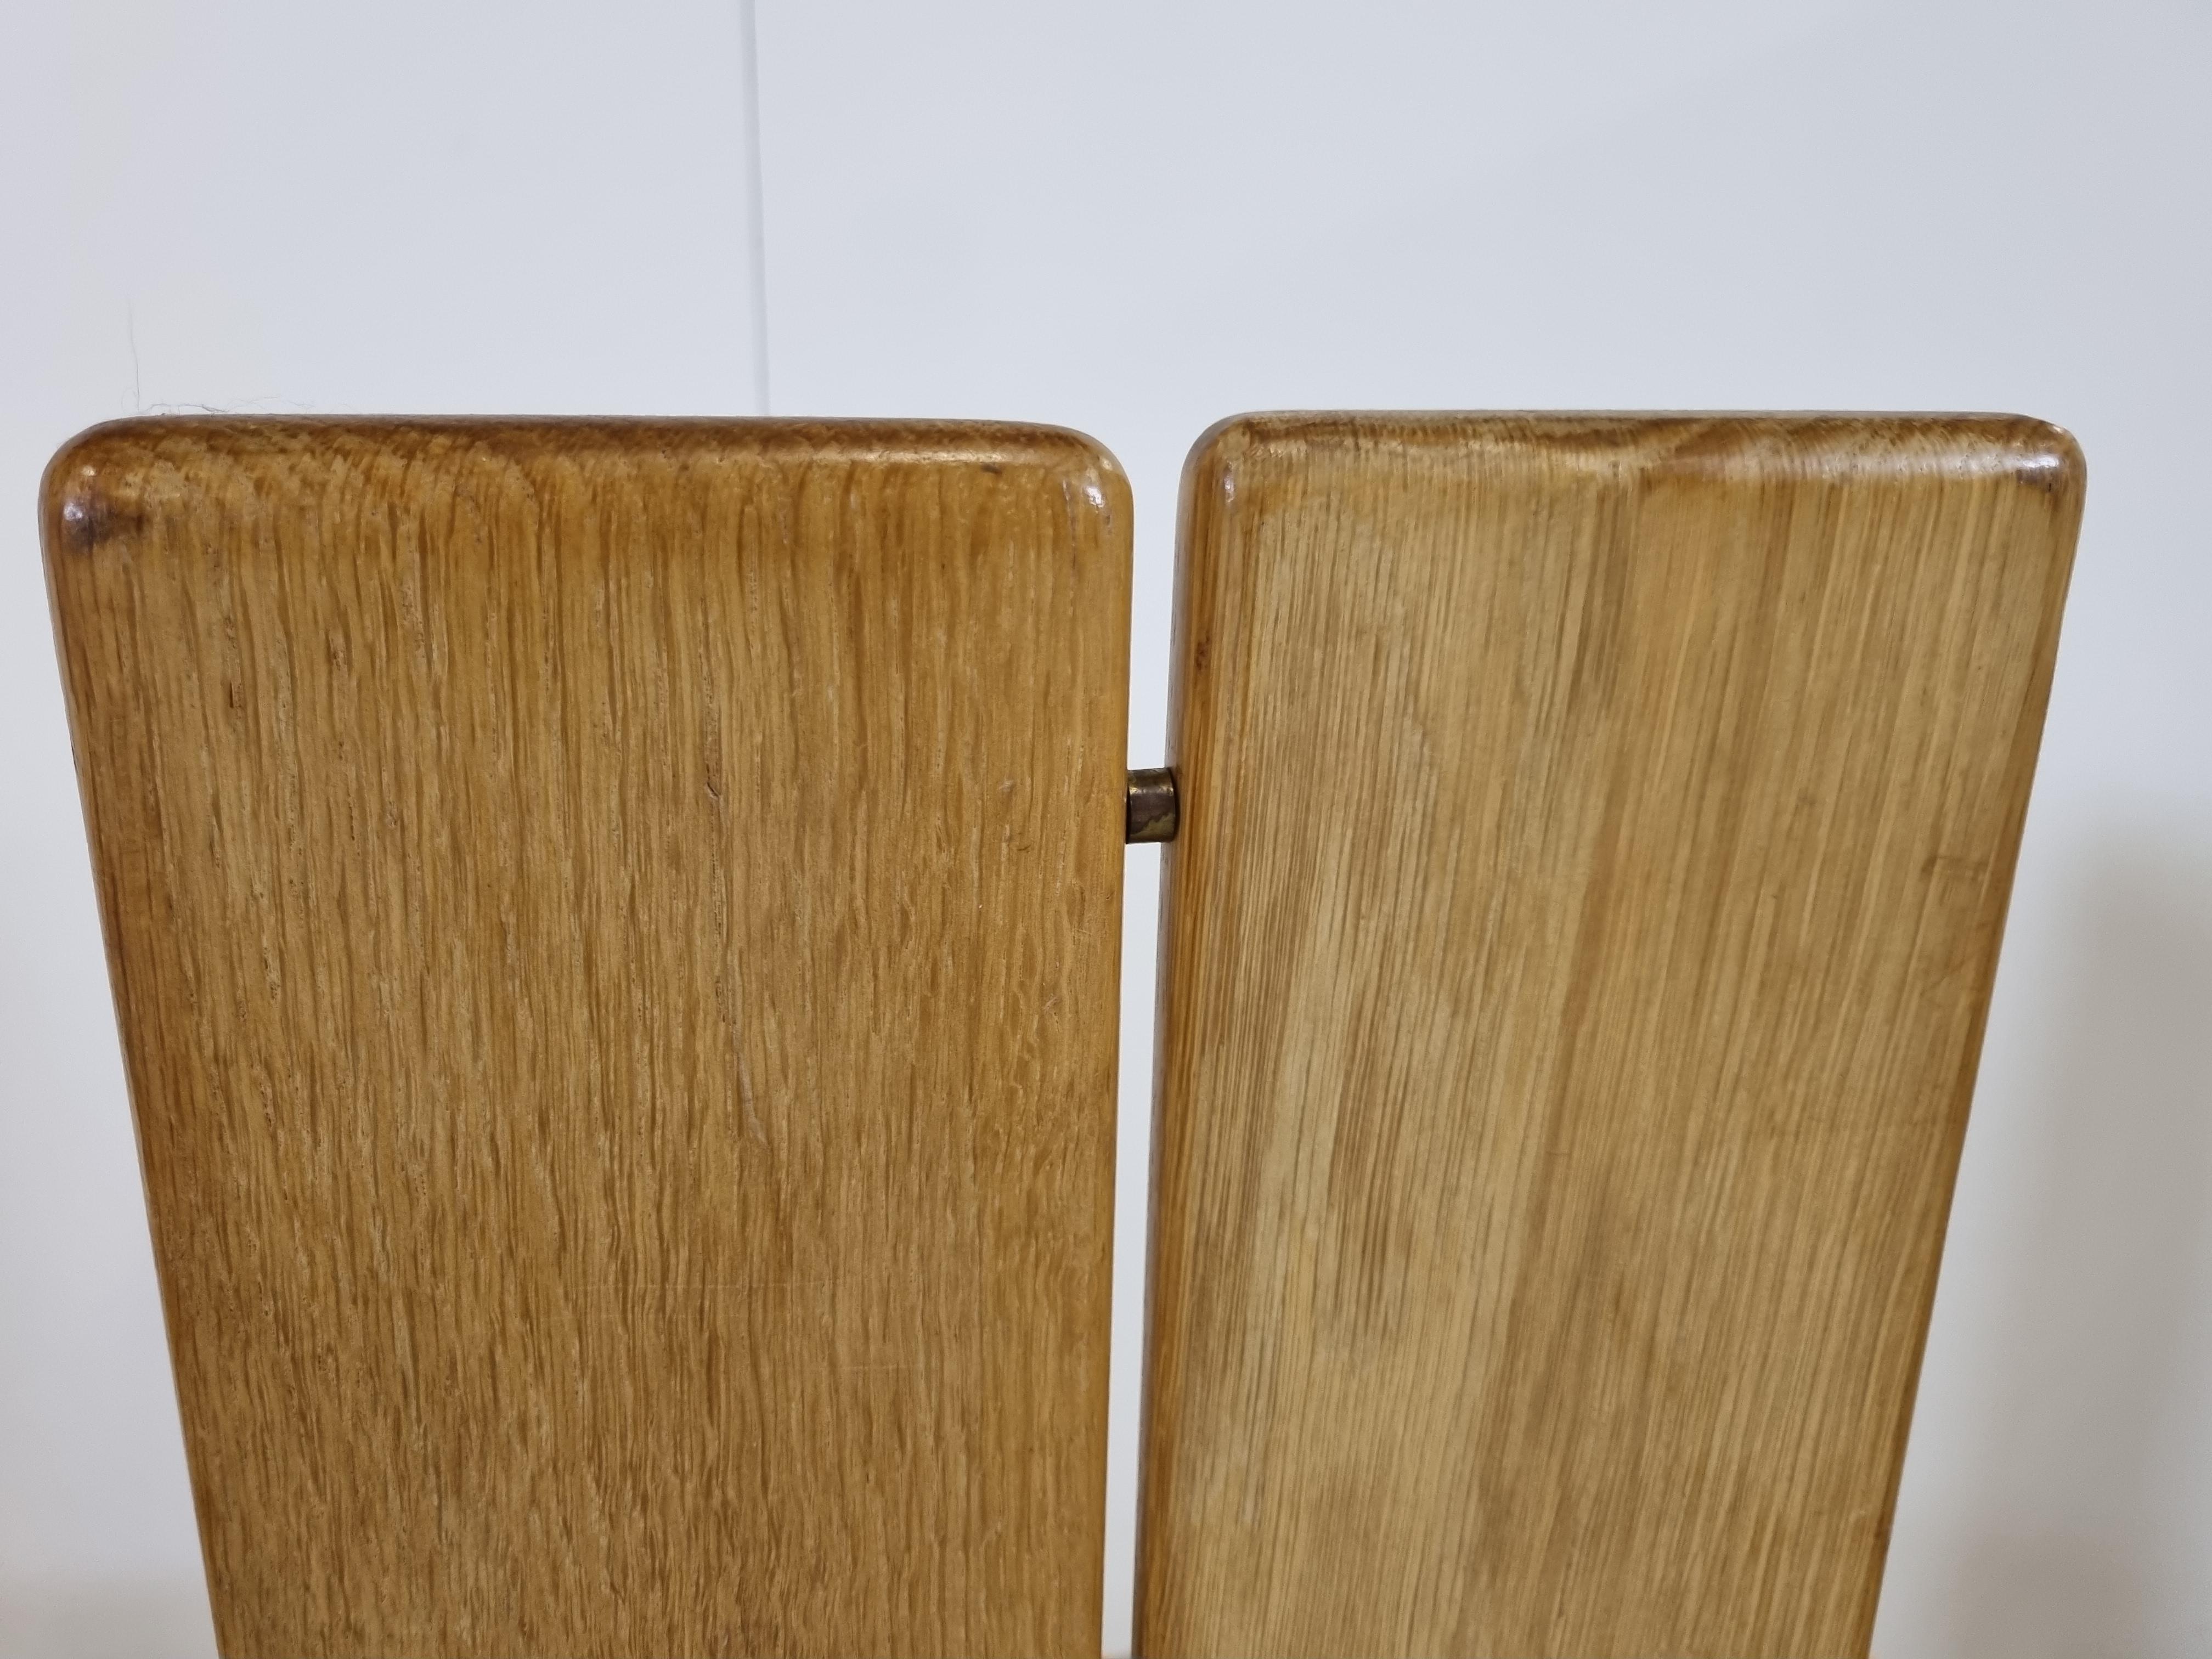 Elegant bentwood oak dining chairs by Rob & Dries Van den Berghe - (Van Den Berghe Pauvers furniture makers from Belgium)

The chairs have beautifully crafted bentwooden frames with split back panels whcih form the legs and backrests all at